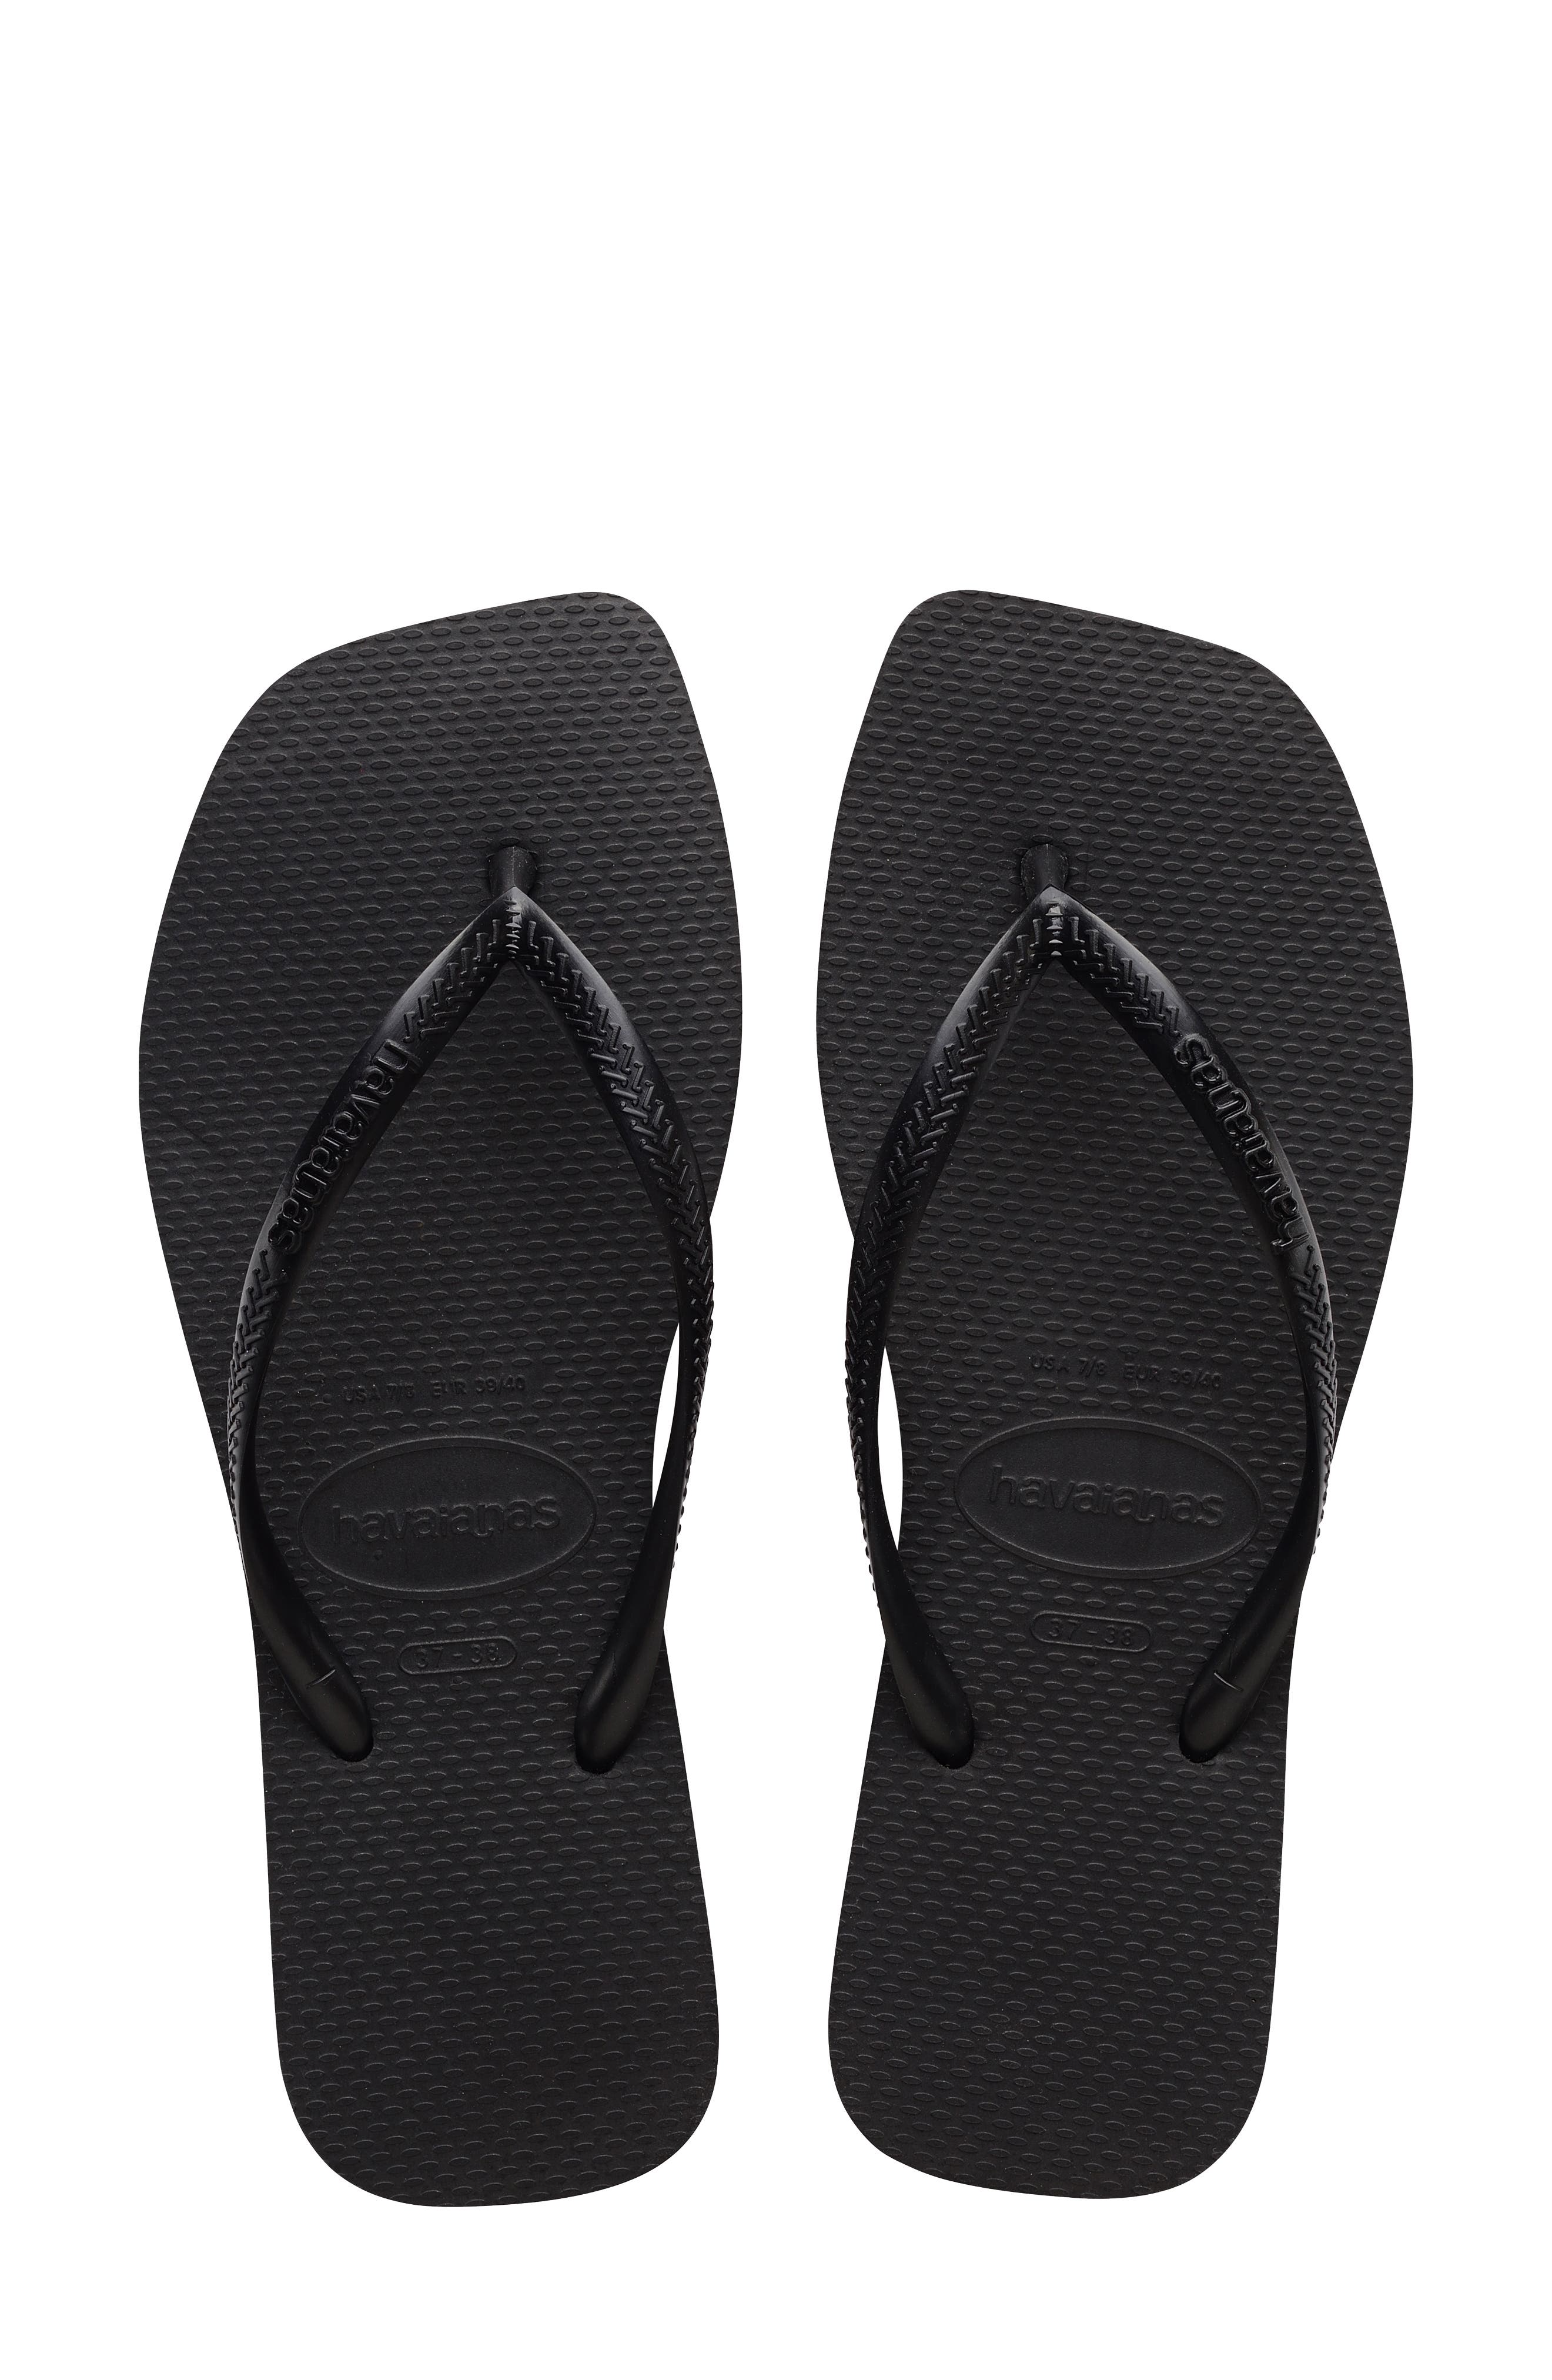 in Black Womens Shoes Flats and flat shoes Sandals and flip-flops Havaianas Slim Organic Flip Flops / Sandals shoes 